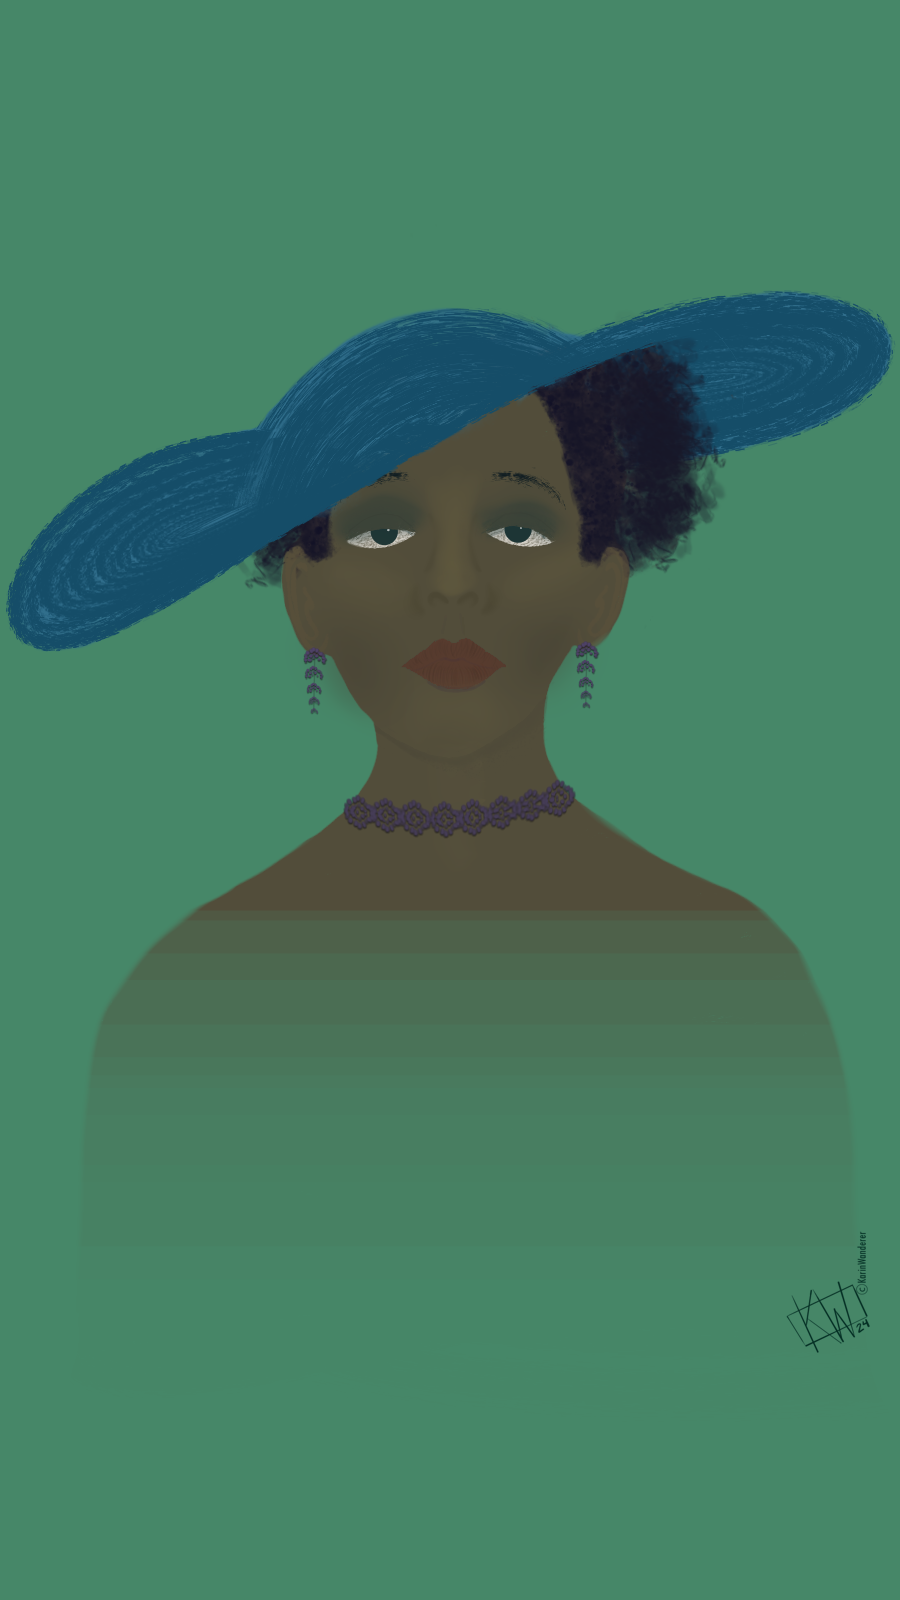 Digital drawing of a woman looking calmly at the viewer. Her curly black hair is worn up under a wide-brimmed blue hat tilted to one side. She wears a purple necklace & earrings. Her body rapidly disappears from the collarbone down.